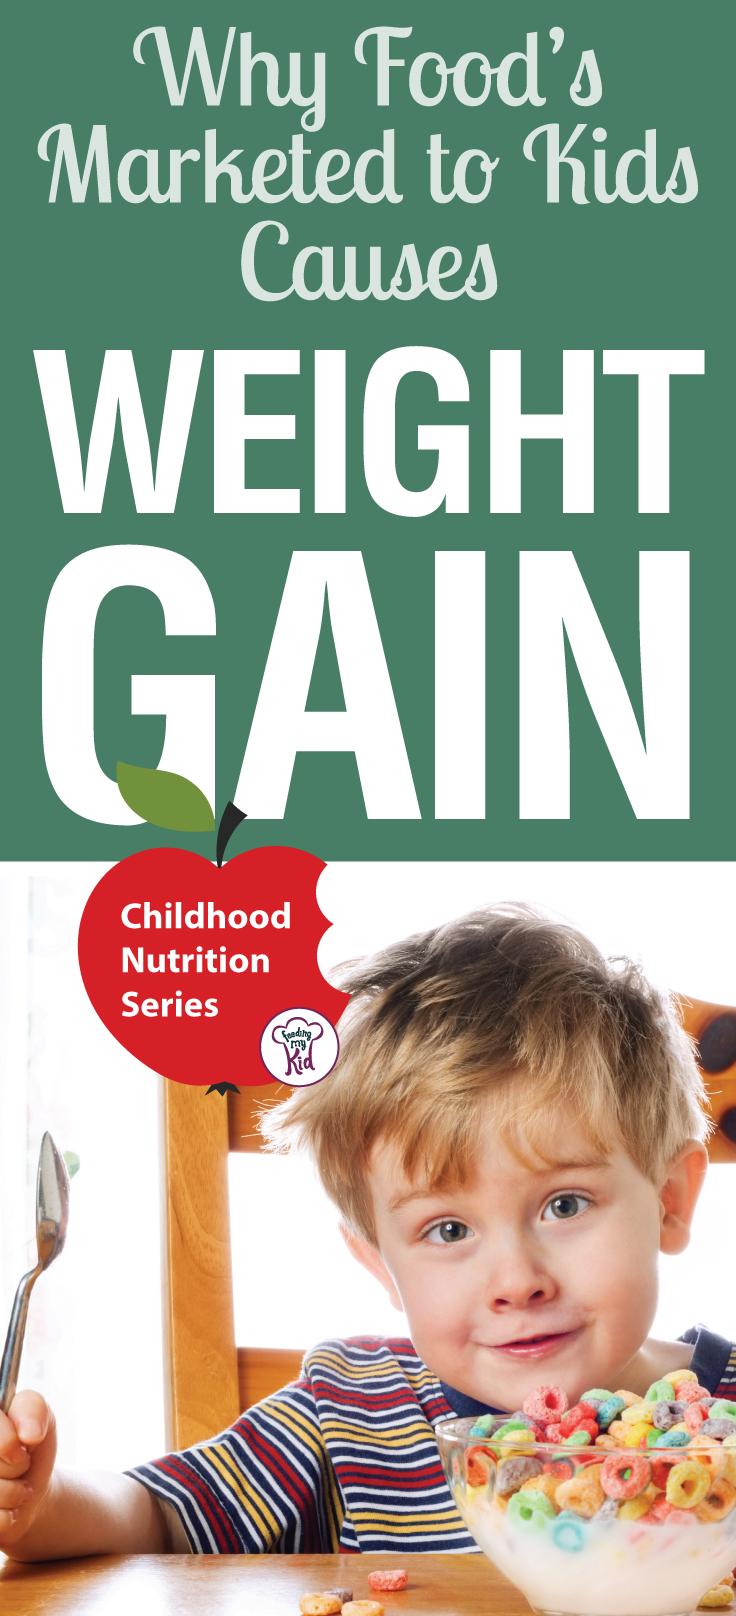 Why Kid's Food Causes Weight Gain in Children - Toucan Sam, Tony the Tiger and the Keebler Elf are all marketing tactics created to help promote a brand and to ultimately manipulate children into demanding these foods. Here are some tactics to get your kids back on track to a healthy lifestyle .